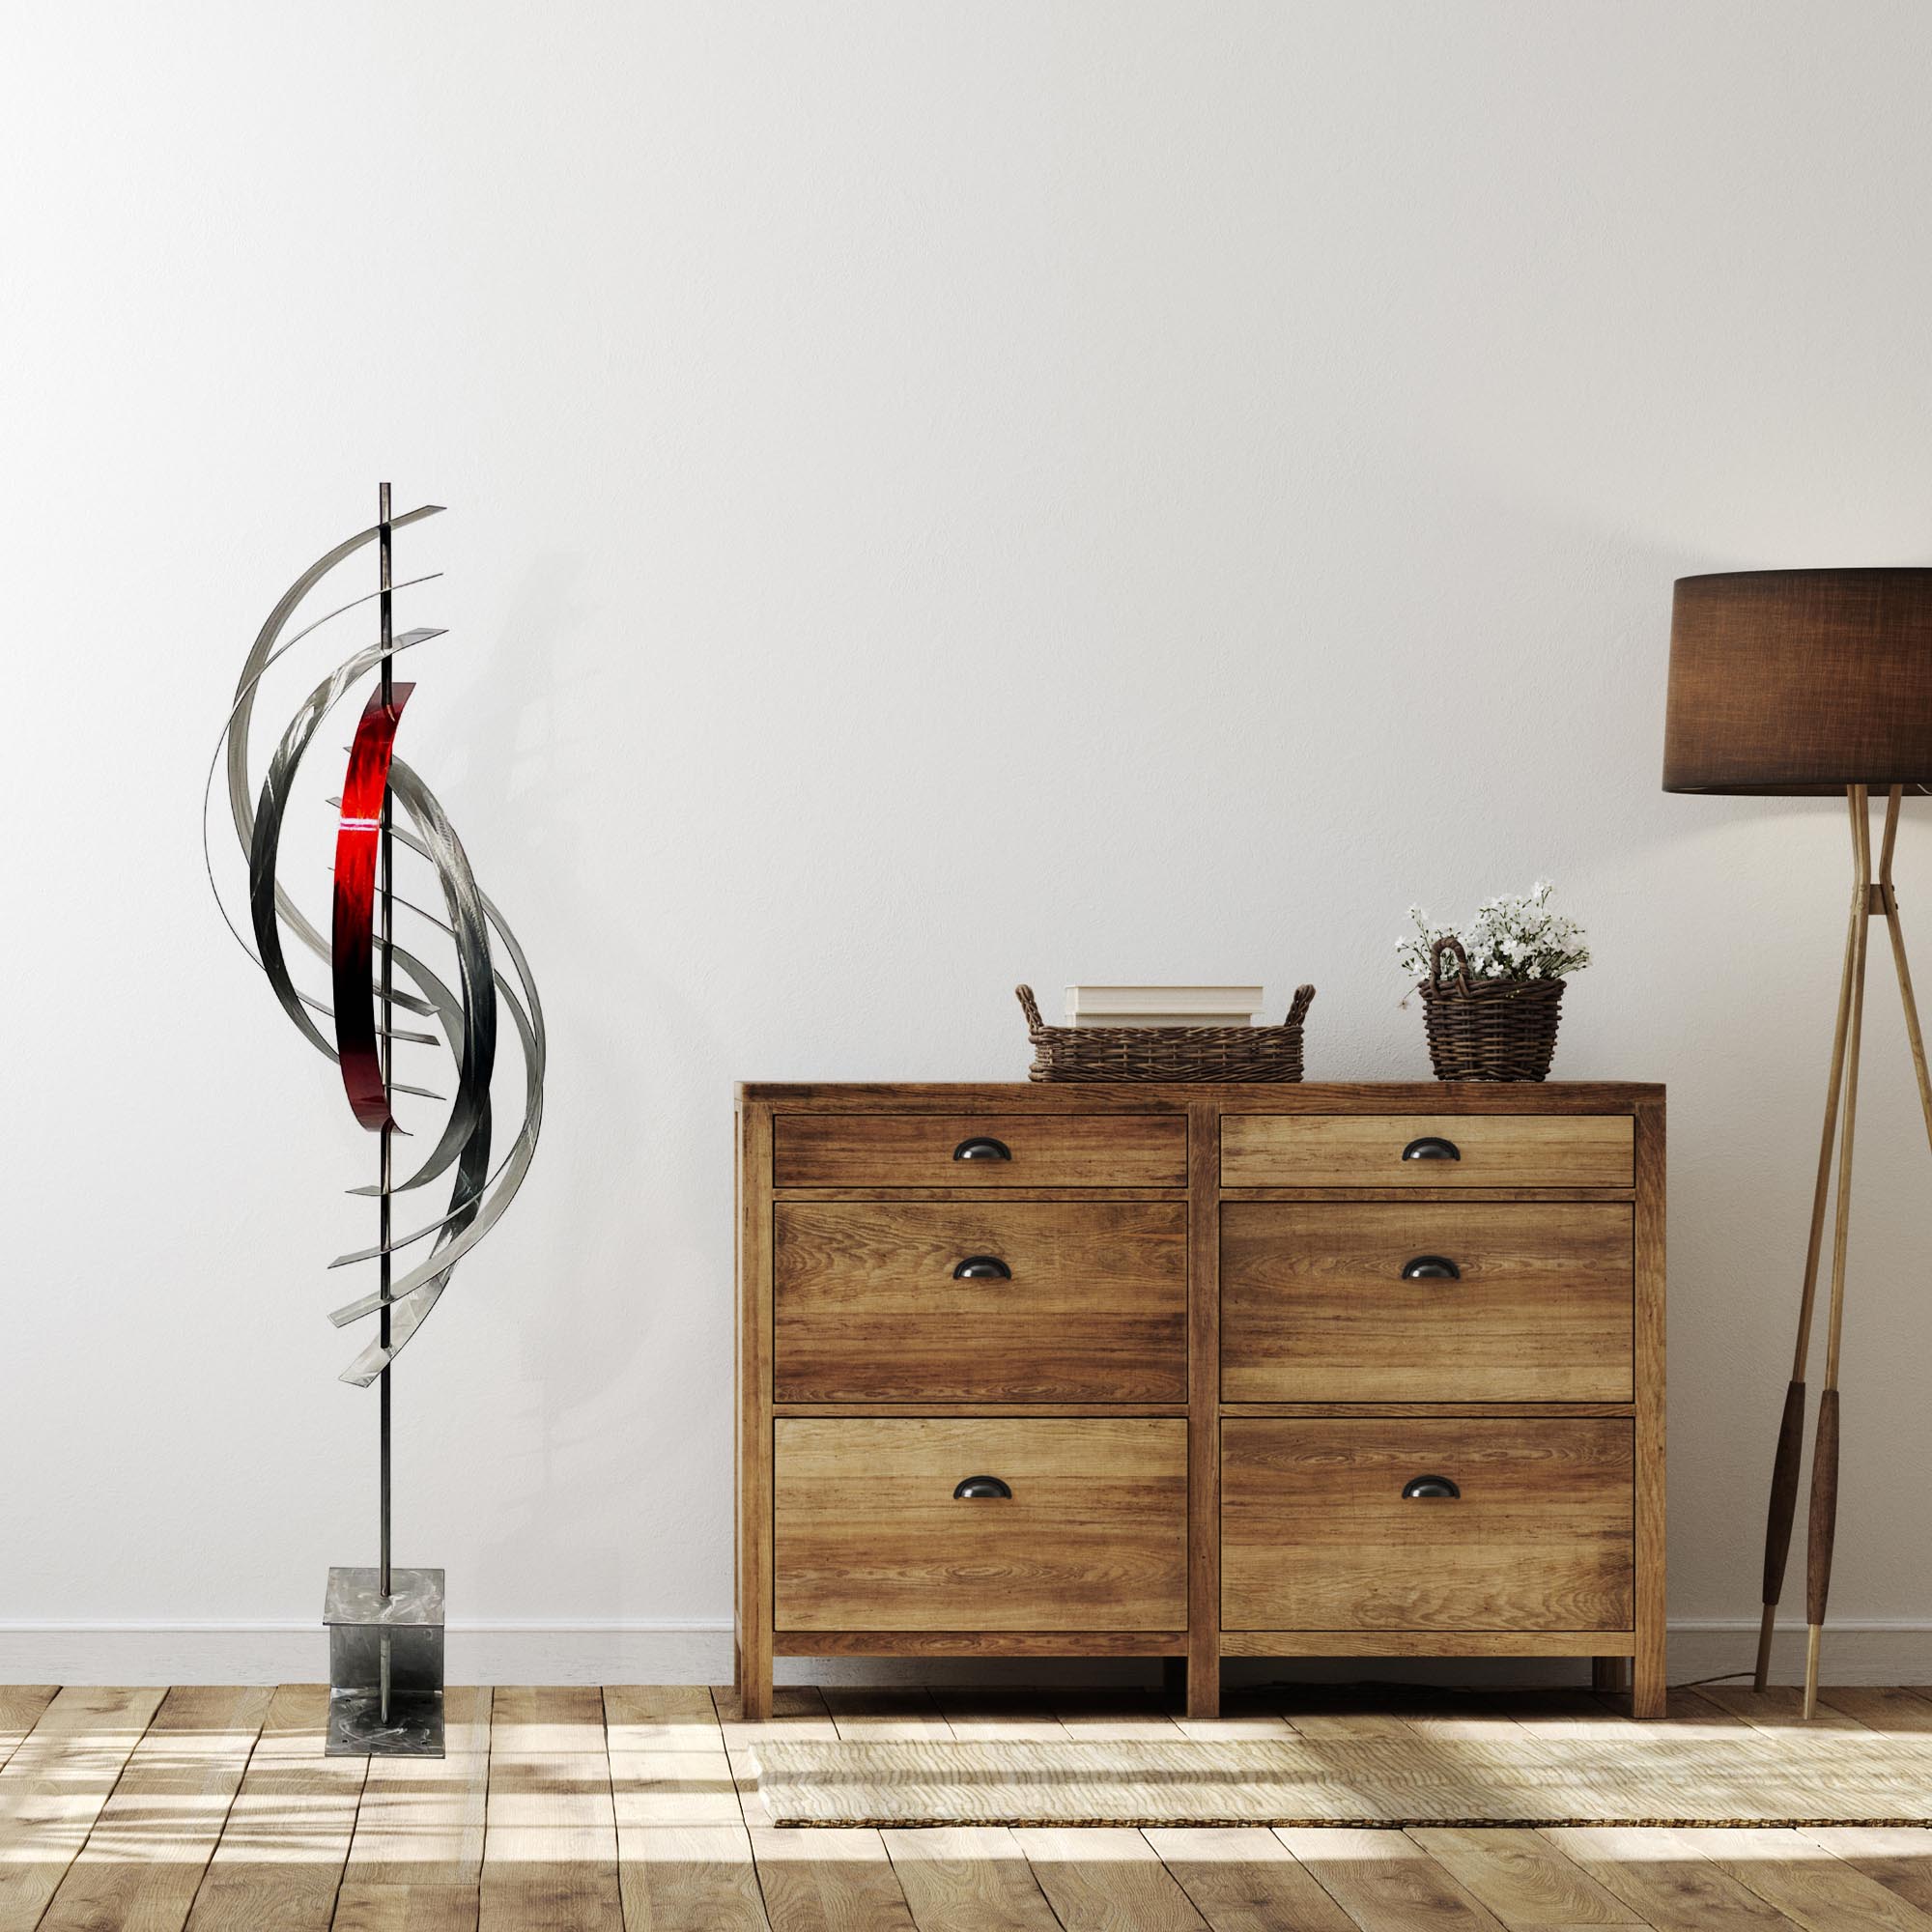 Nautilus Red by Jackson Wright - Abstract Metal Sculpture, Kinetic Sculpture - Lifestyle View